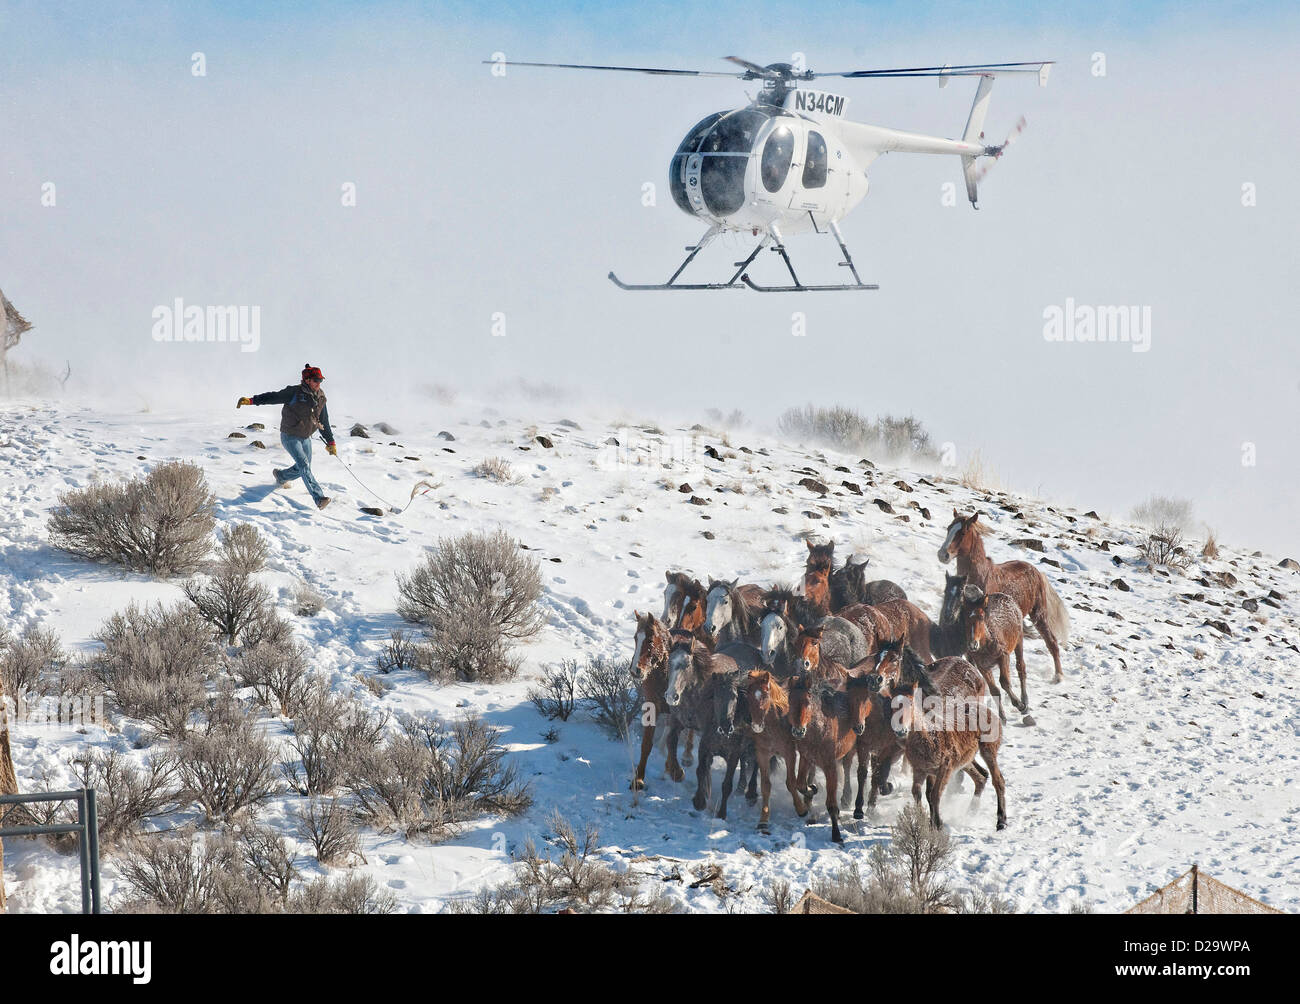 A Bureau of Land Management helicopter helps corral wild mustangs during a winter round up January 13, 2013 in the Star Ridge portion of the Owyhee Management Area in Nevada. Stock Photo